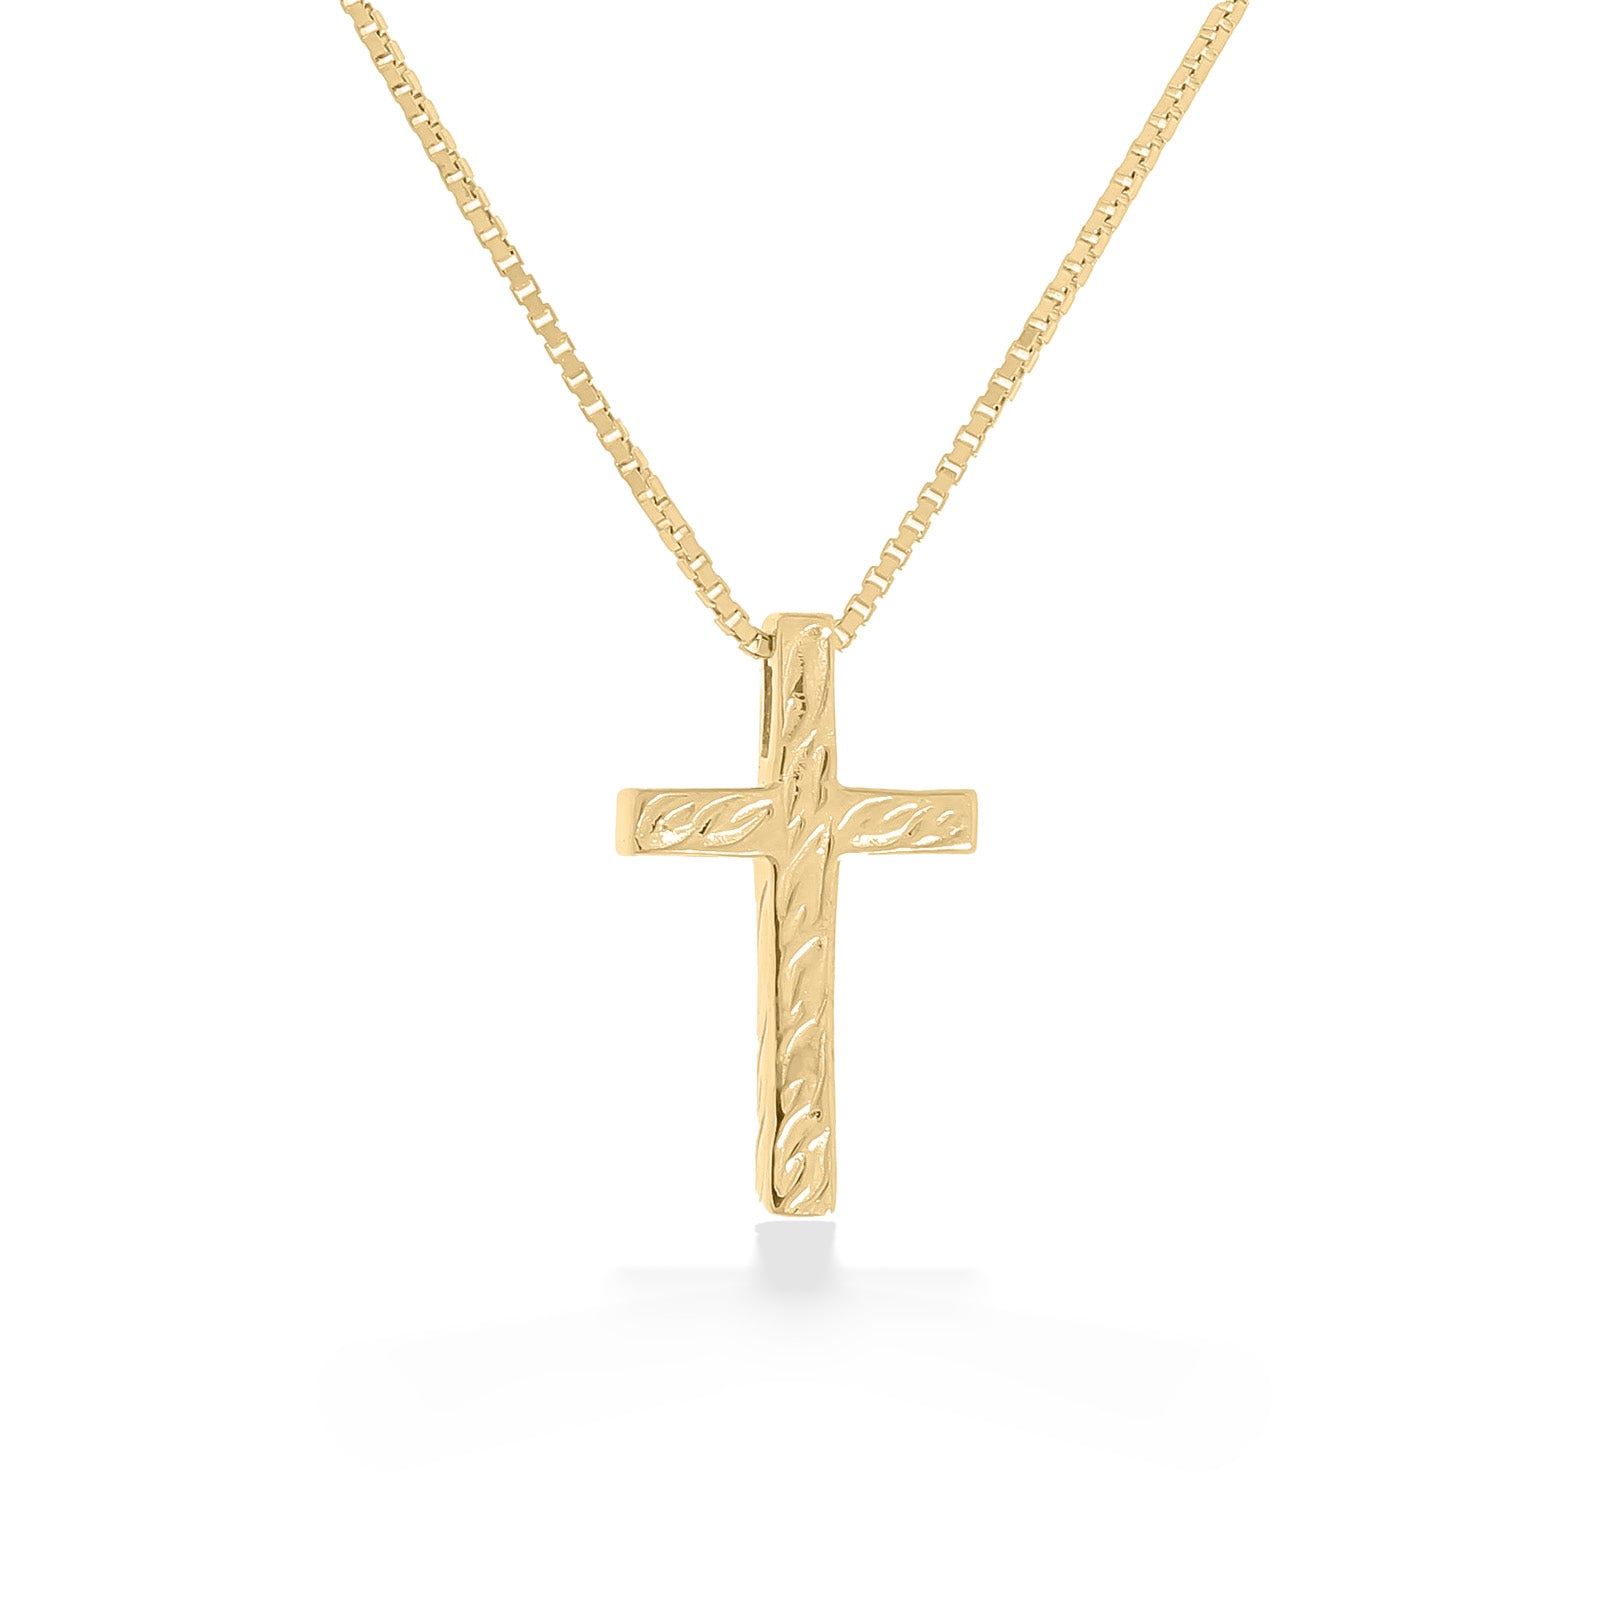 Child's Two-Tone Crucifix Pendant Necklace in 14kt Yellow Gold. 15